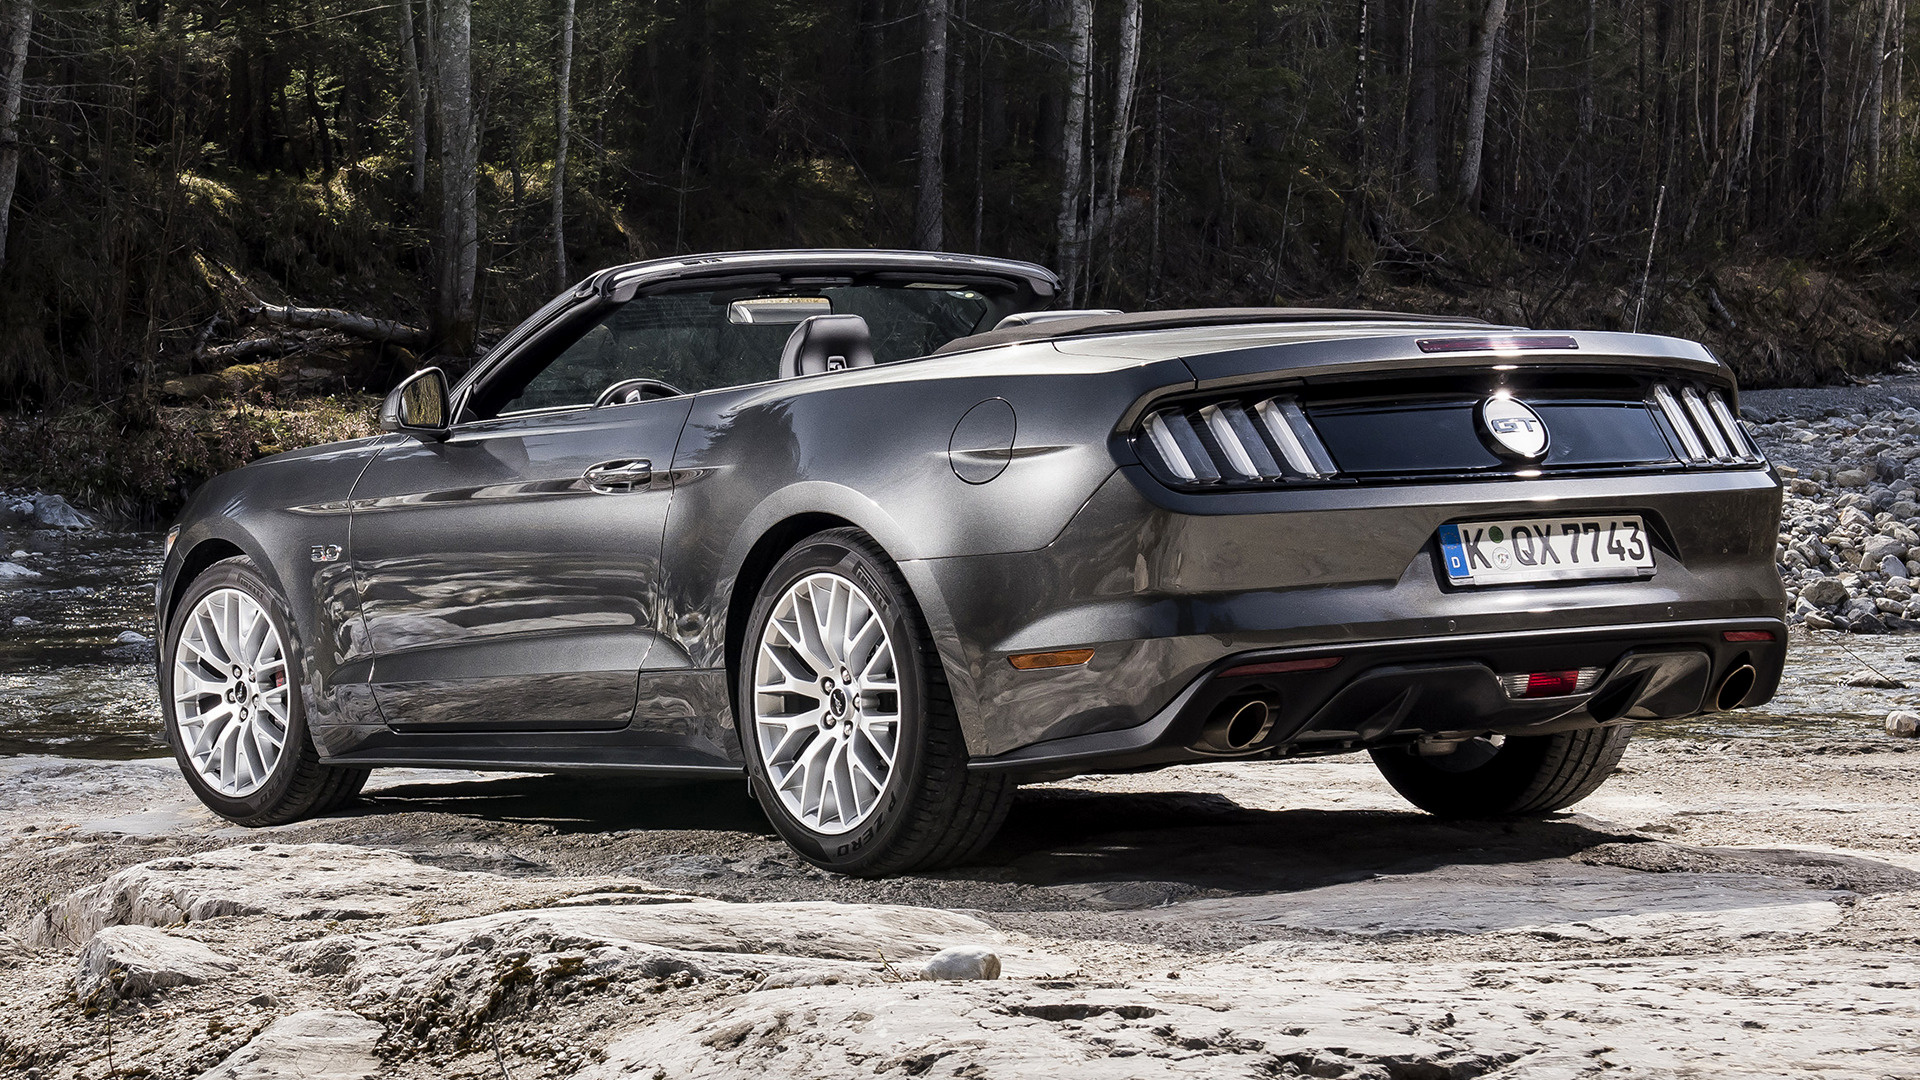 Car Convertible Ford Mustang Gt Muscle Car Silver Car 1920x1080